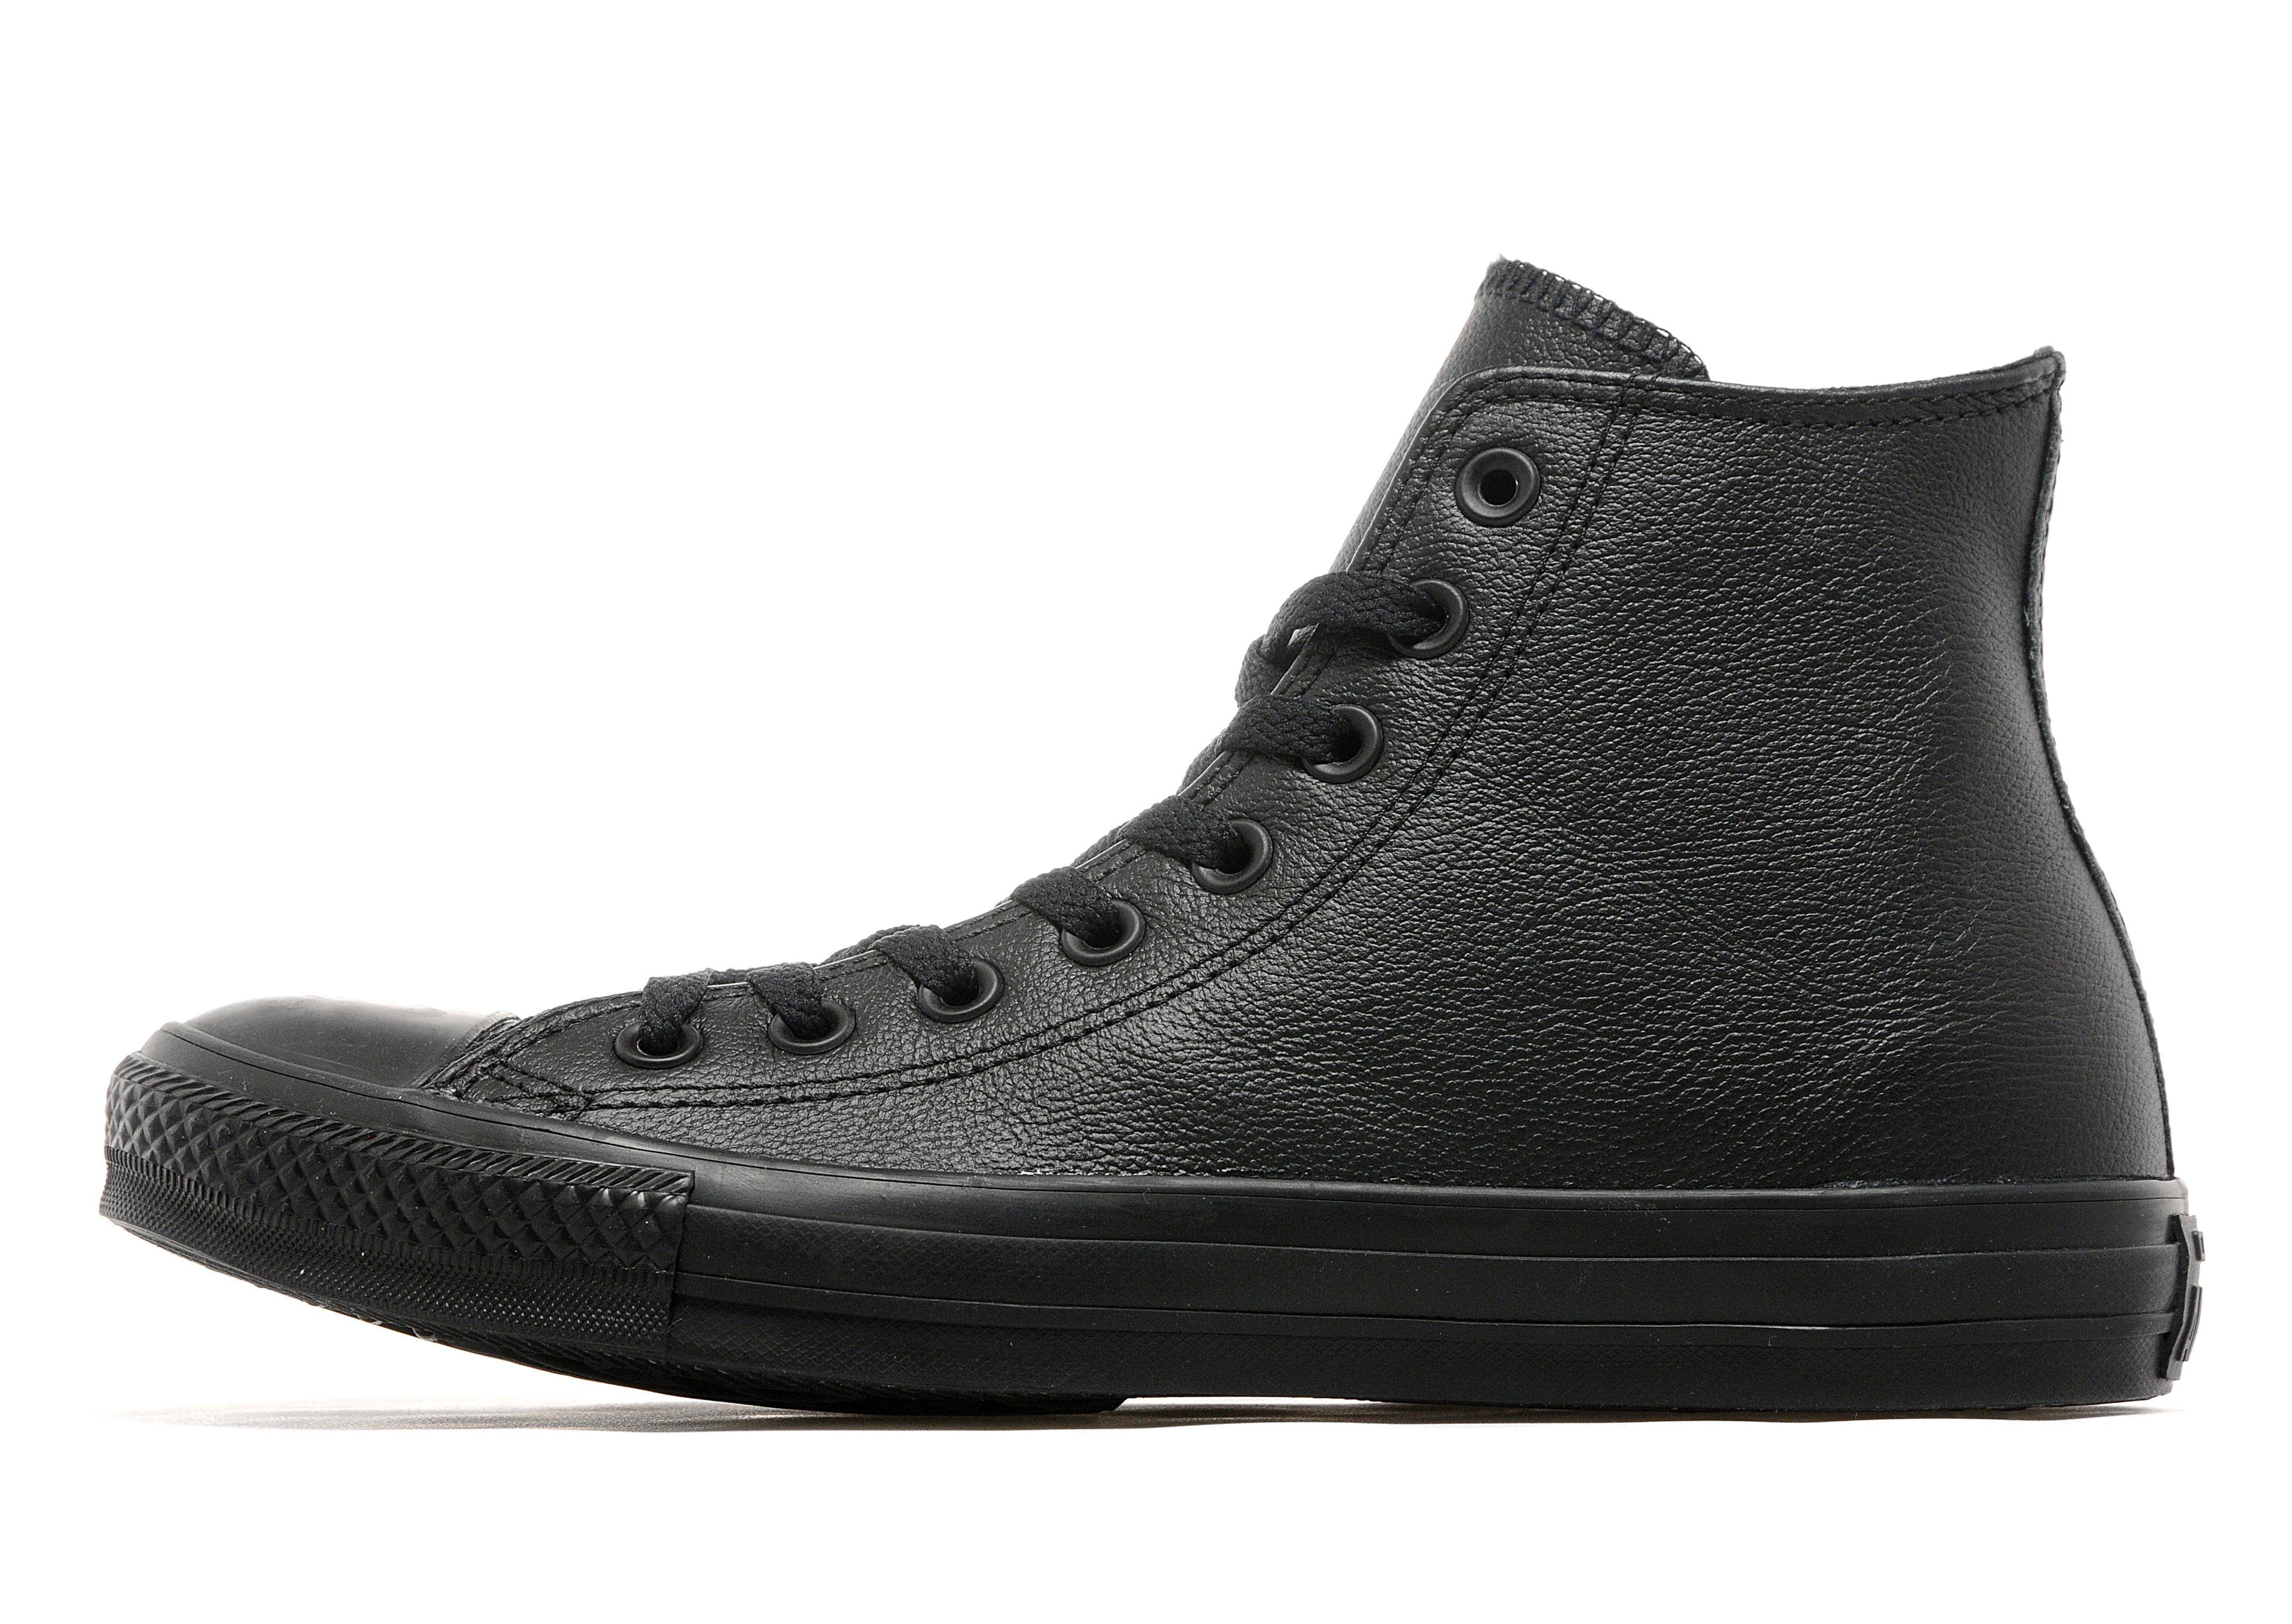 Converse All Star High Leather Mono in Black for Men - Lyst